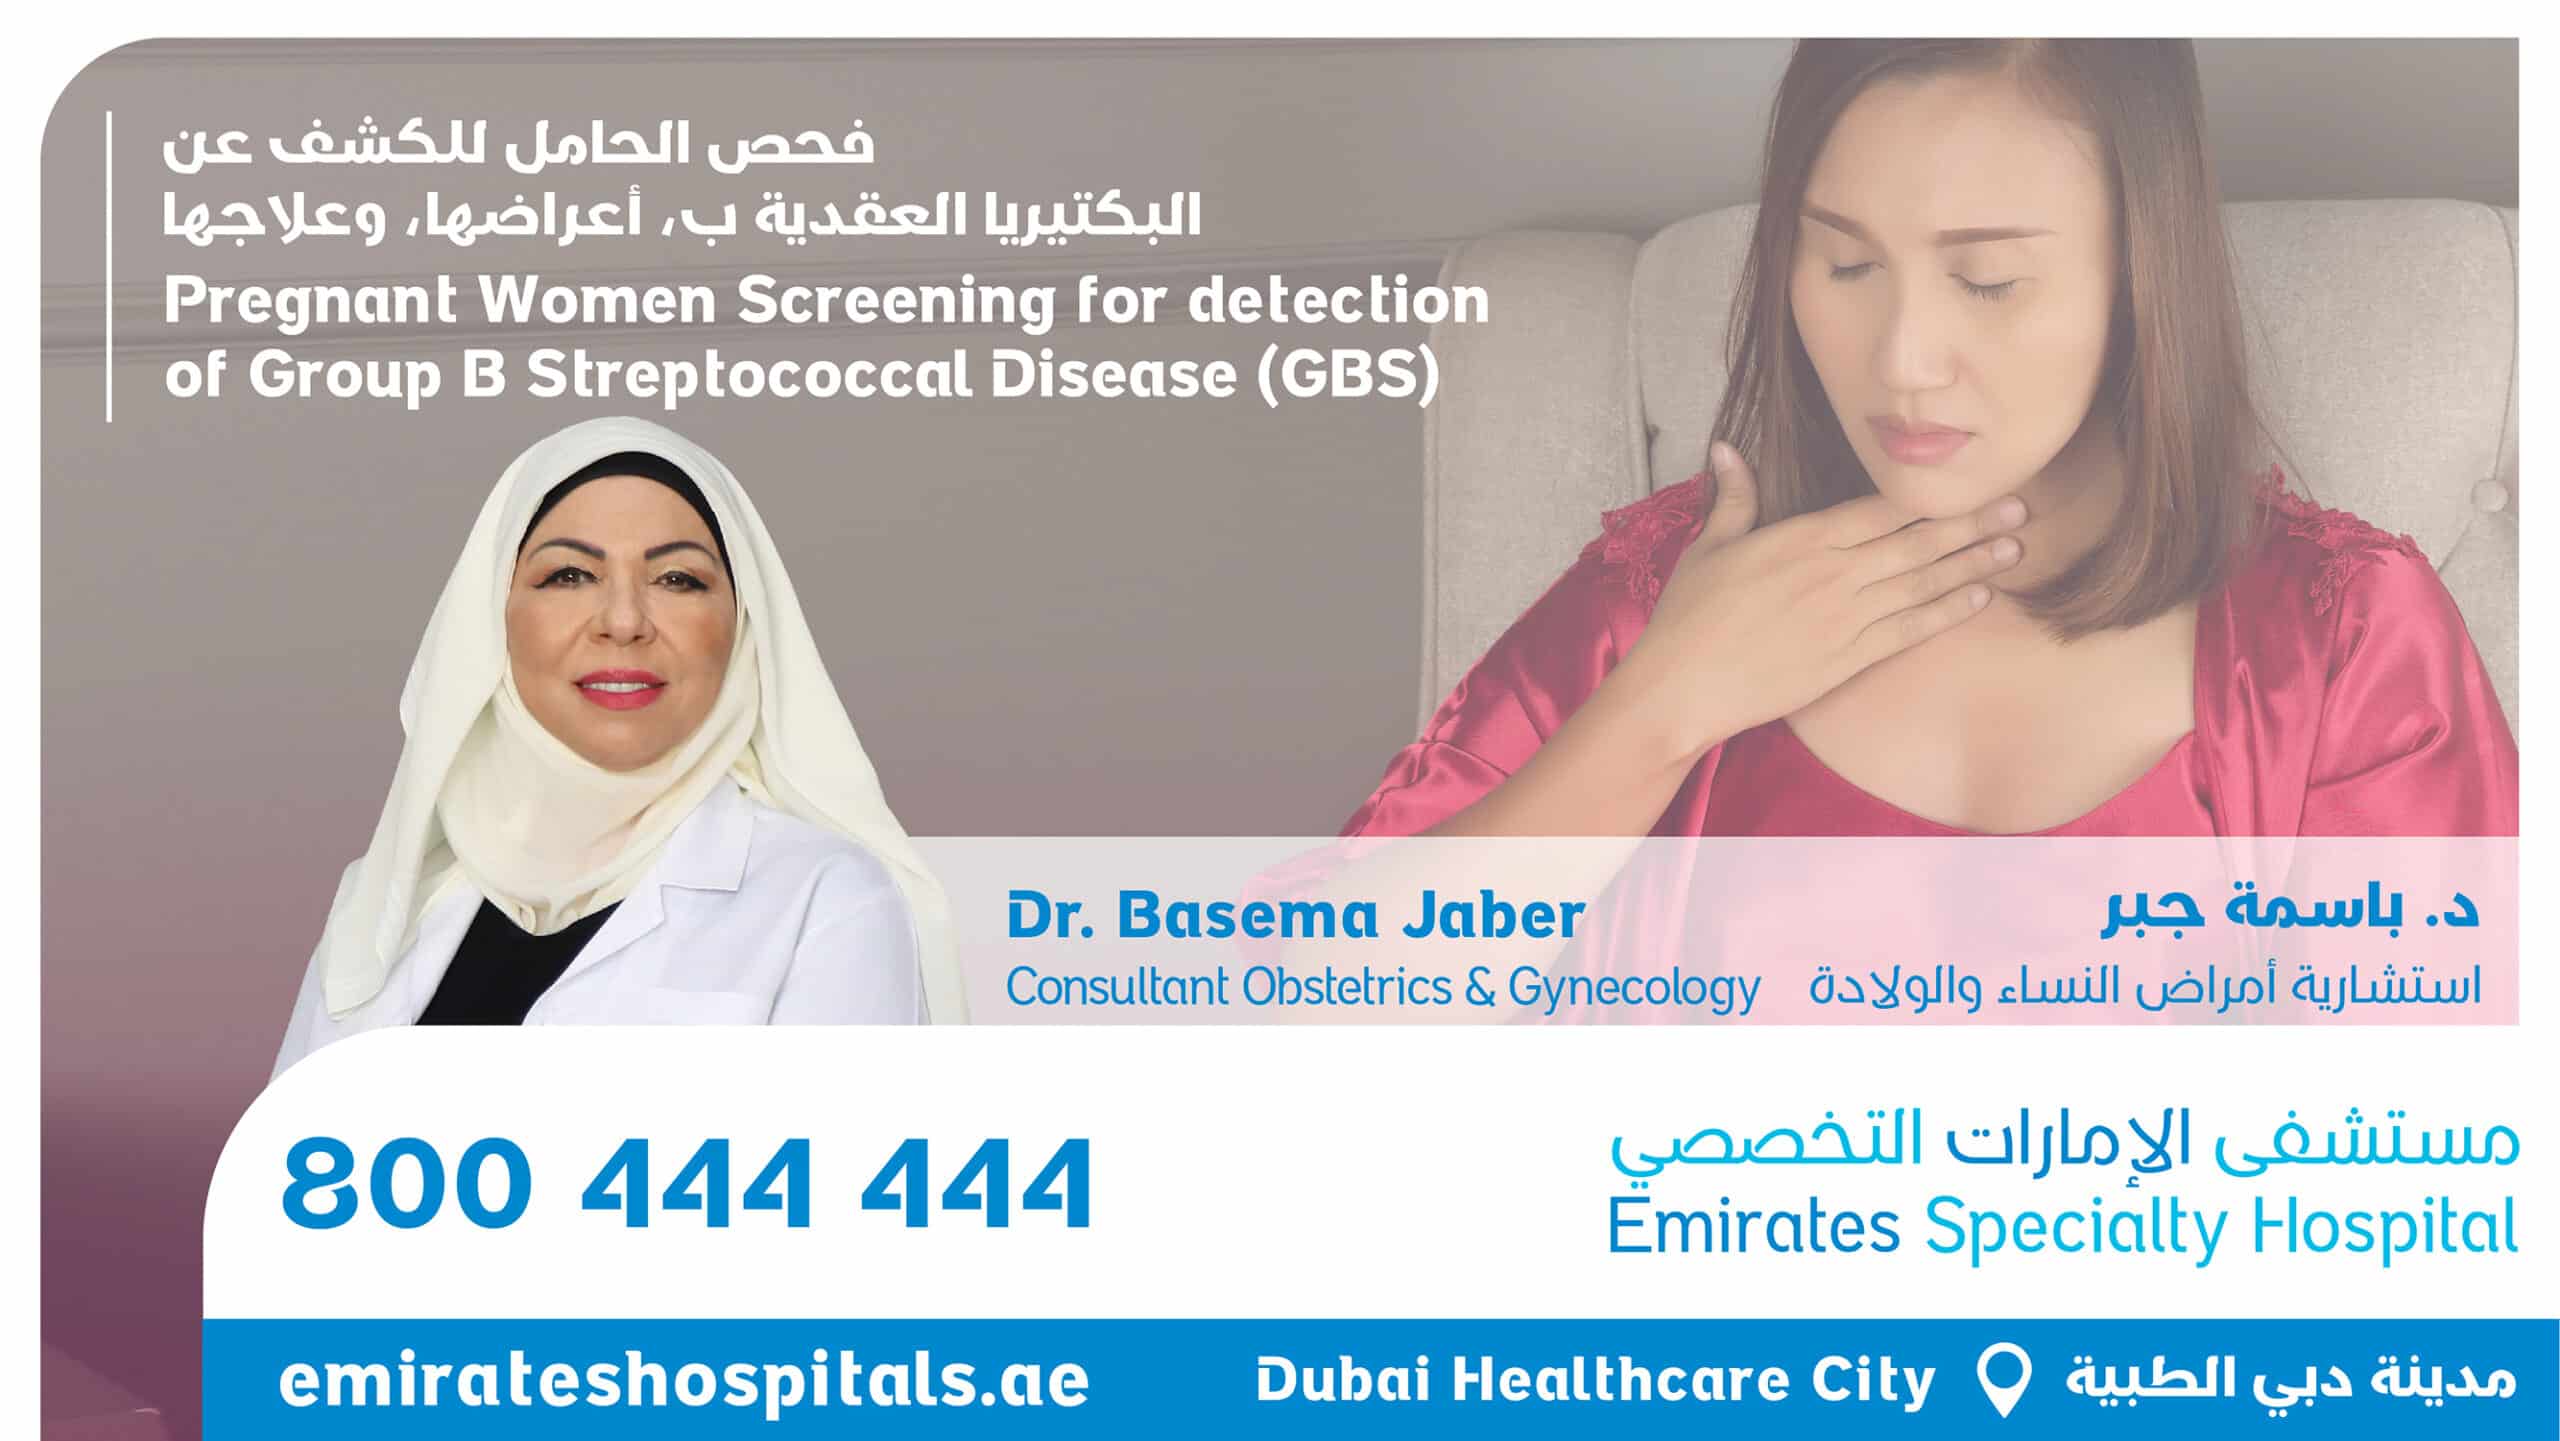 Group B Streptococcal Disease – Dr. Basema Jaber – Consultant Obstetrics & Gynecology